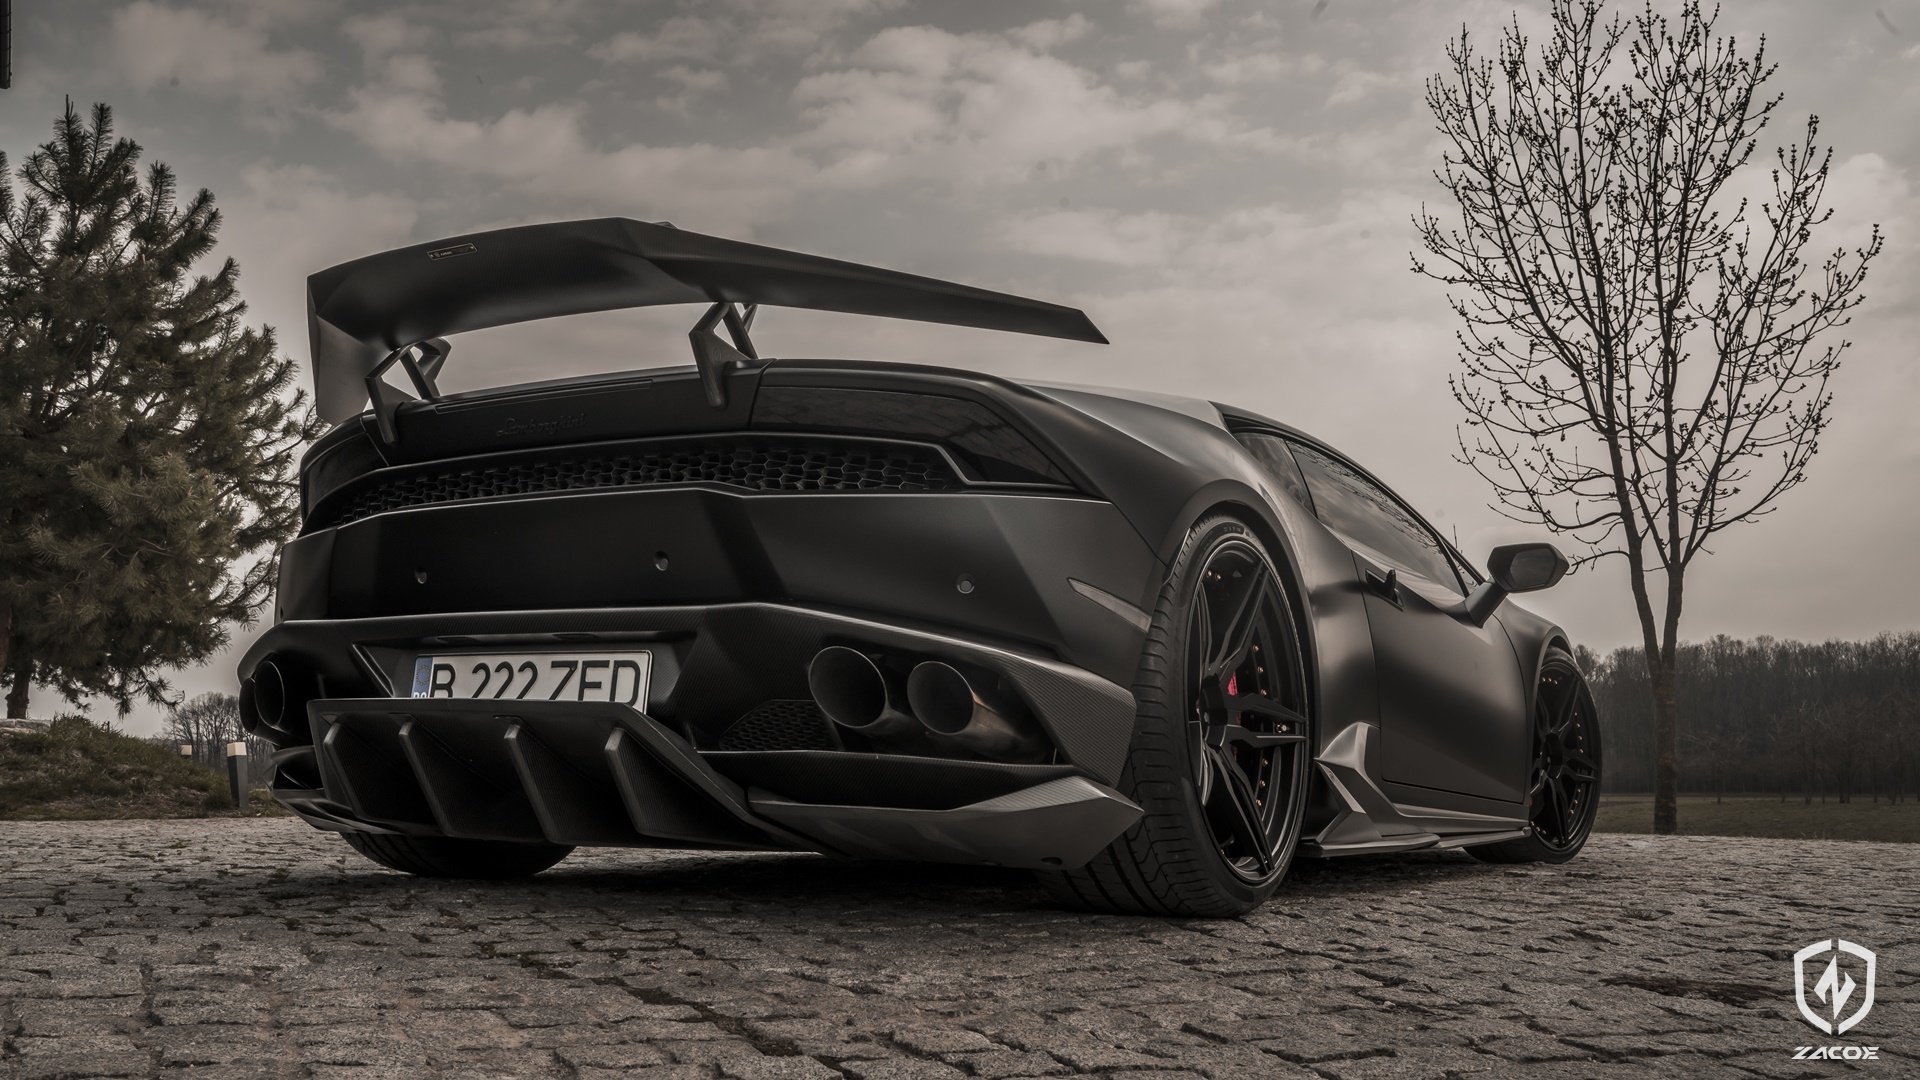 ZACOE carbon fiber front lip and side skirts for Lamborghini Huracan LP610-4.